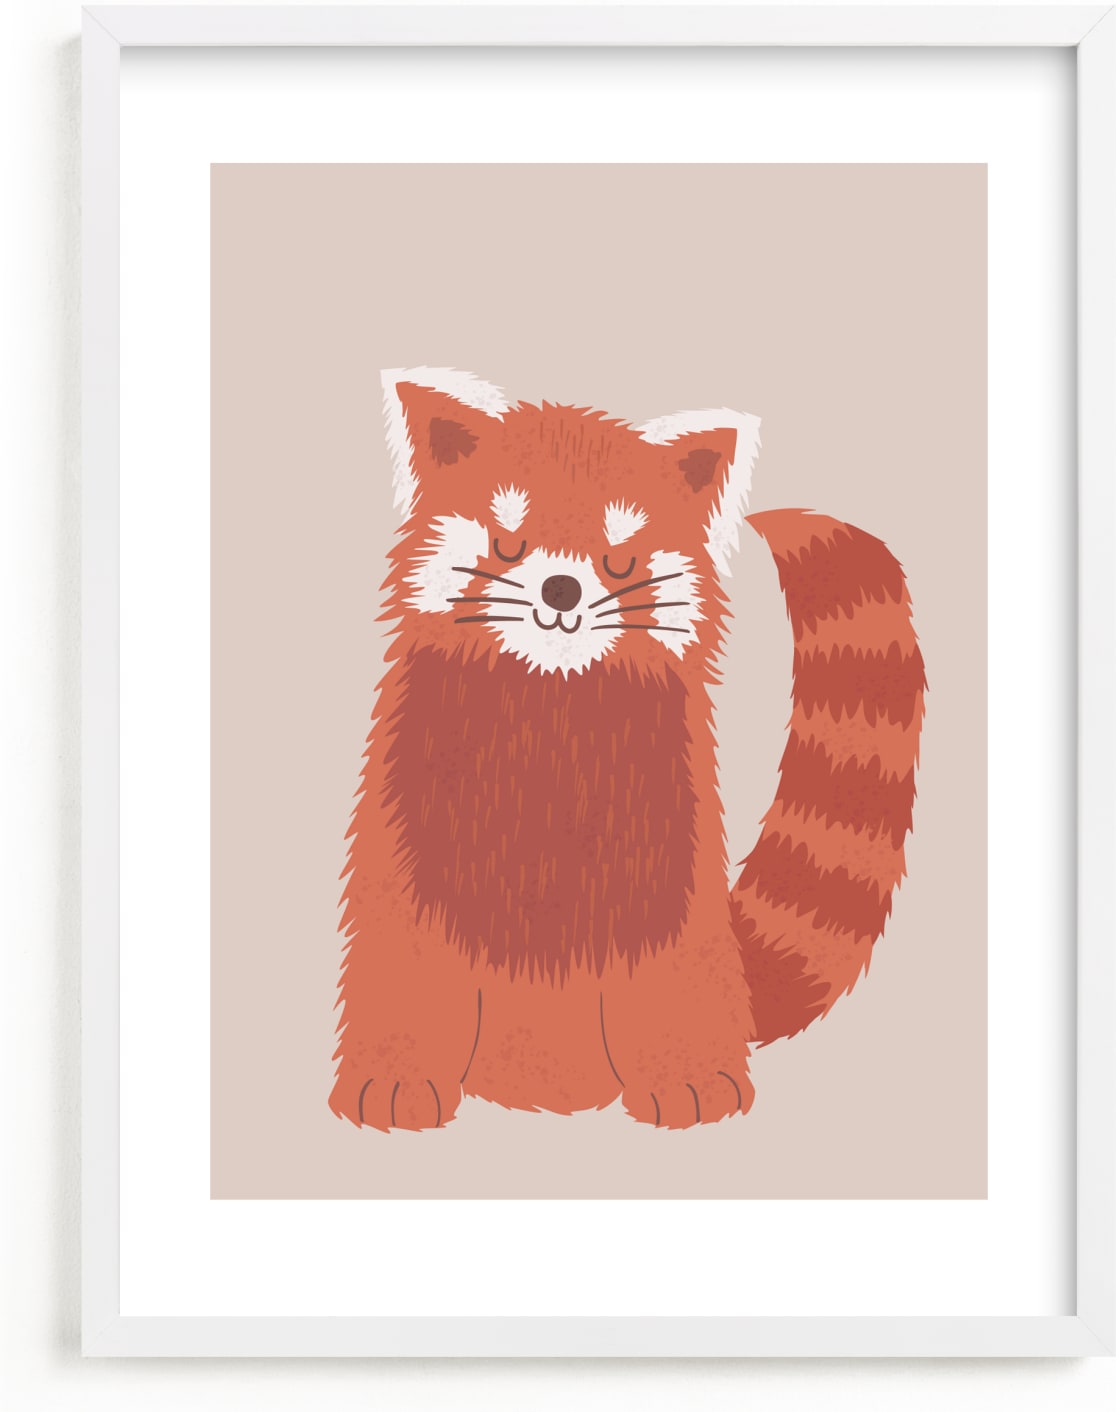 This is a white kids wall art by Jennifer Holbrook called Sleepy Red Panda.